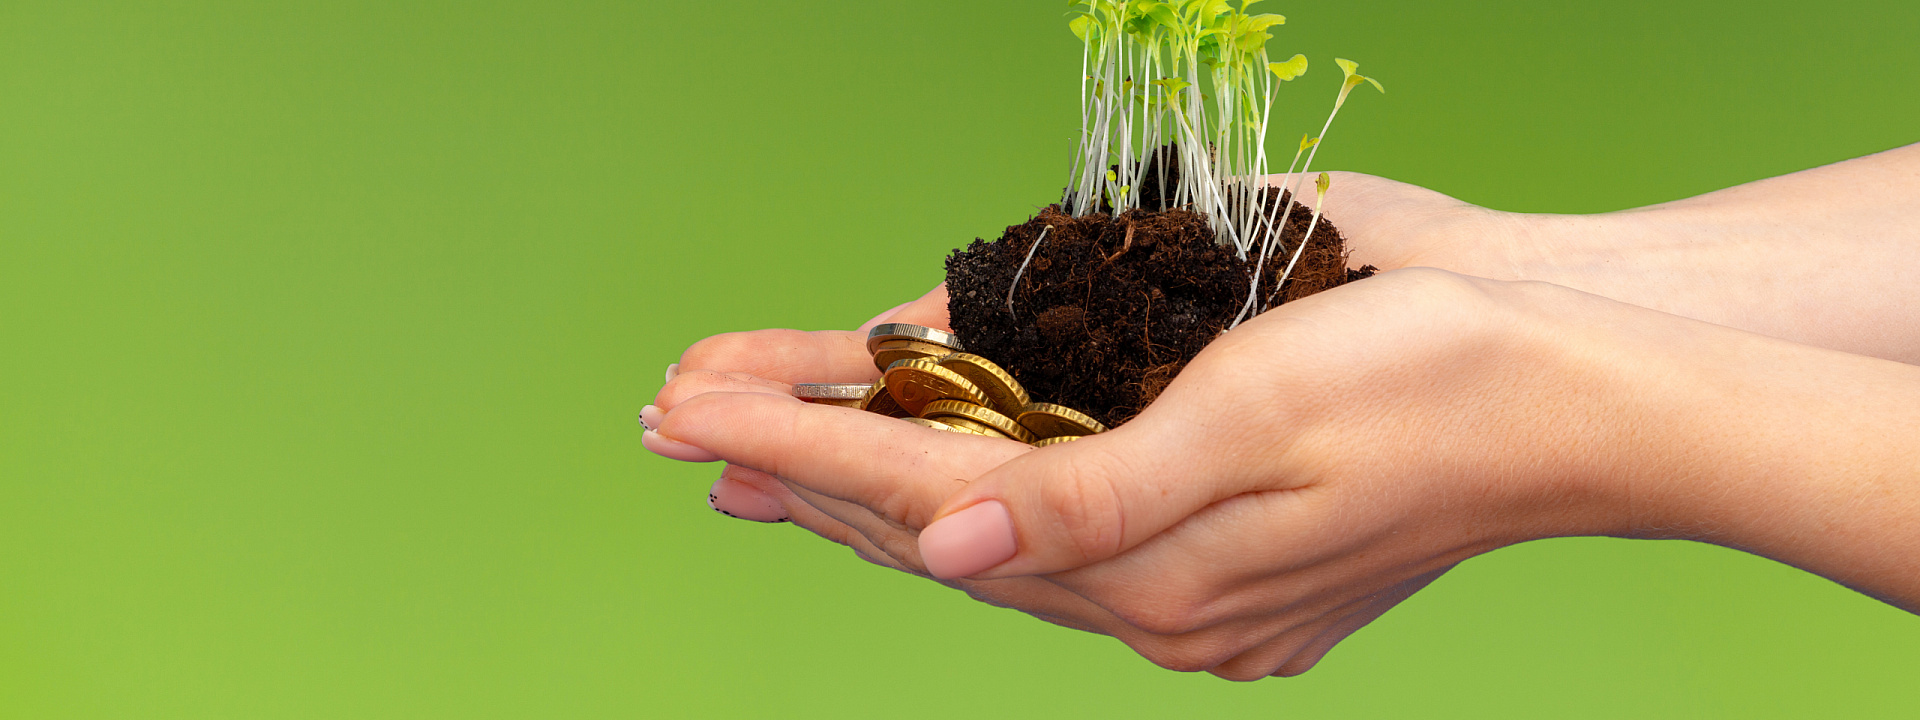 Hands holding growing plant and money